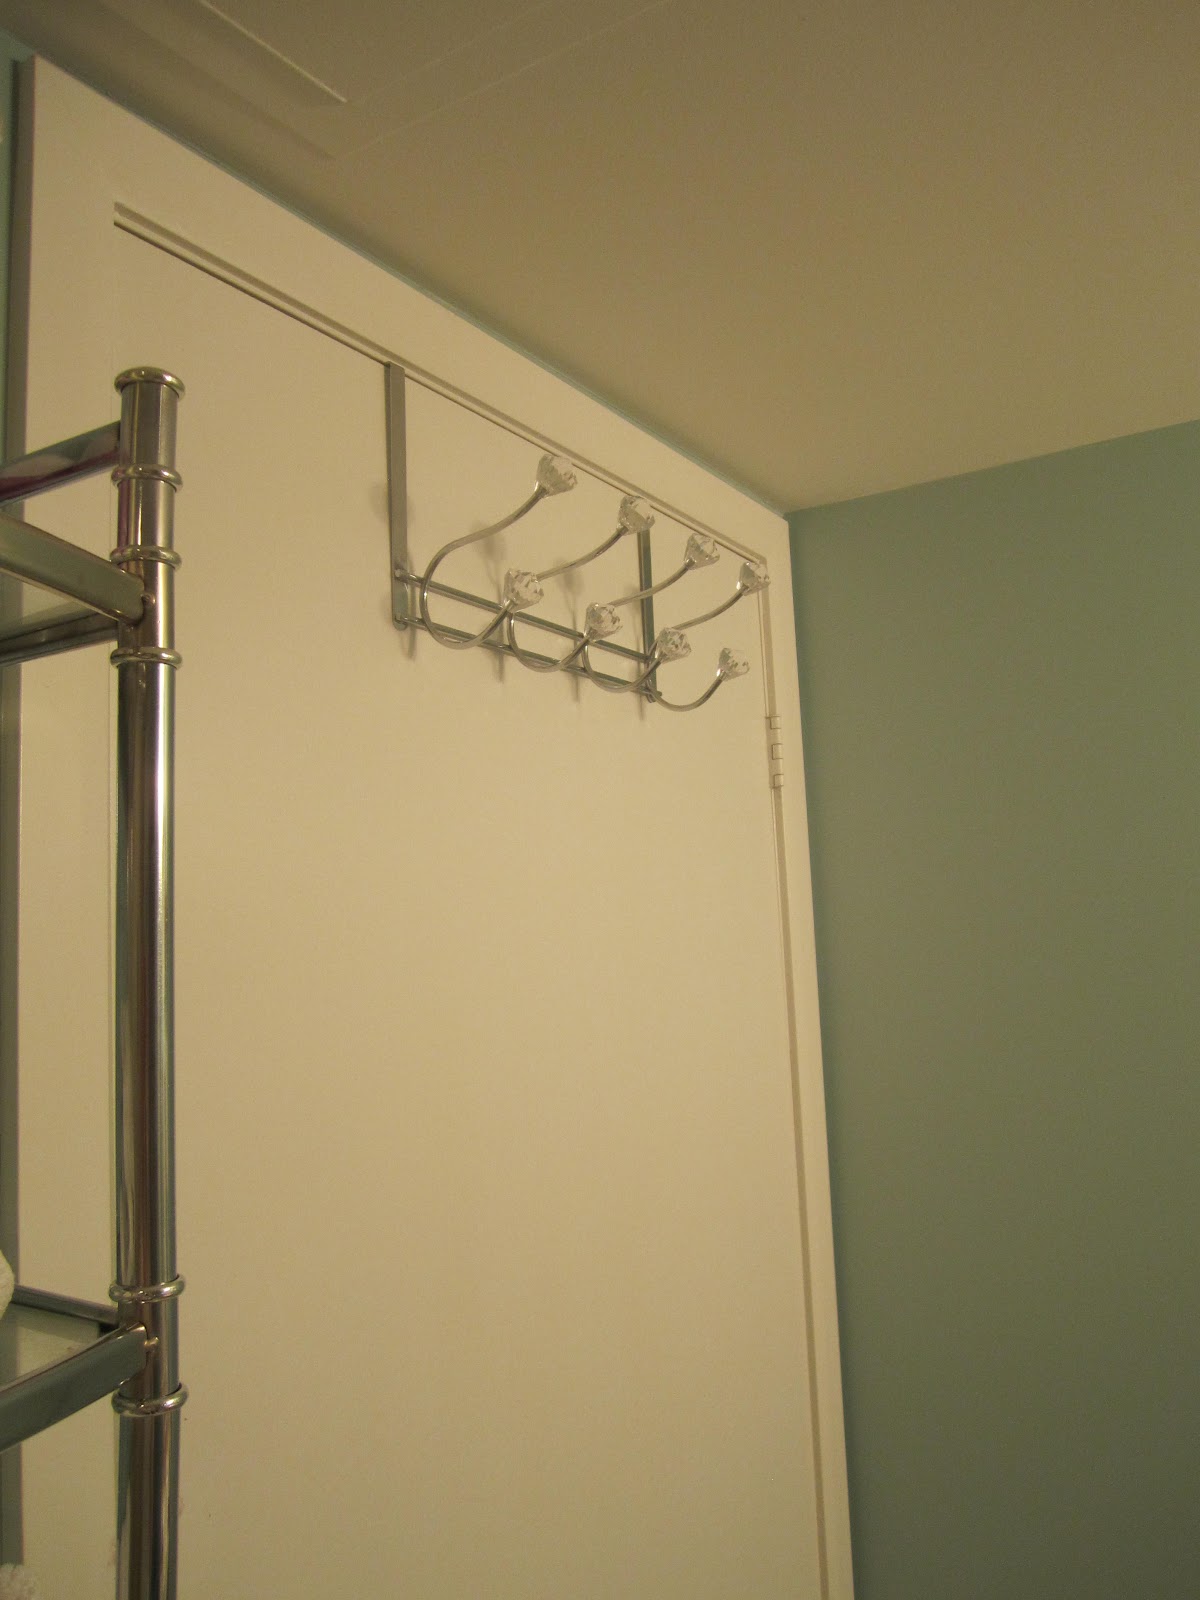 Waffling: I Had a Rackcident {How to Remove a Glued on Towel Rack}